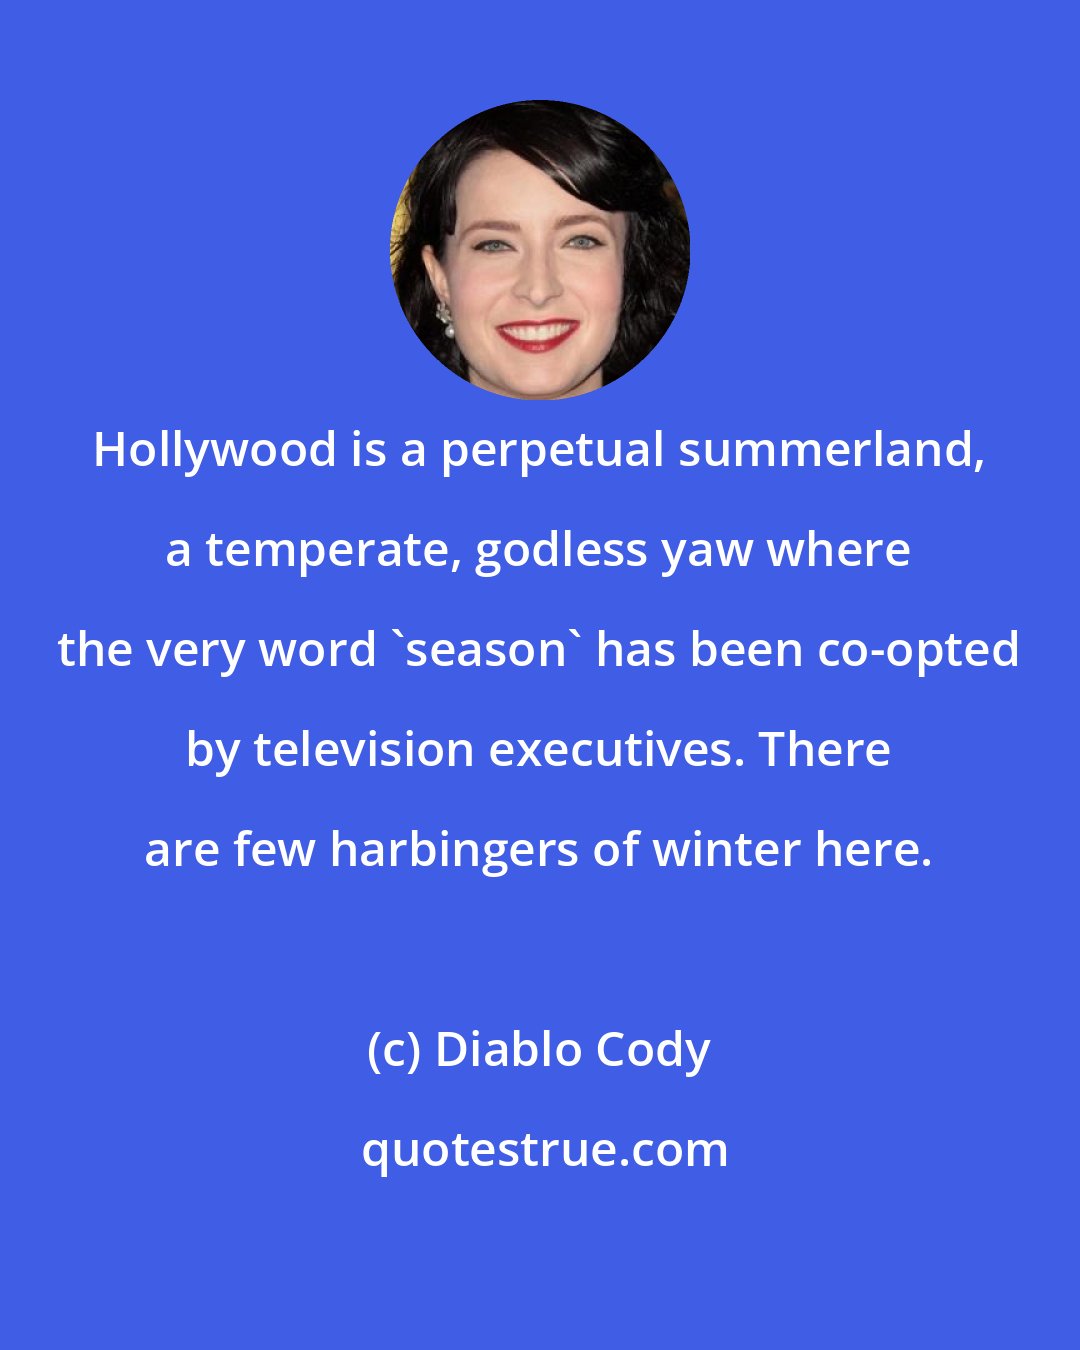 Diablo Cody: Hollywood is a perpetual summerland, a temperate, godless yaw where the very word 'season' has been co-opted by television executives. There are few harbingers of winter here.